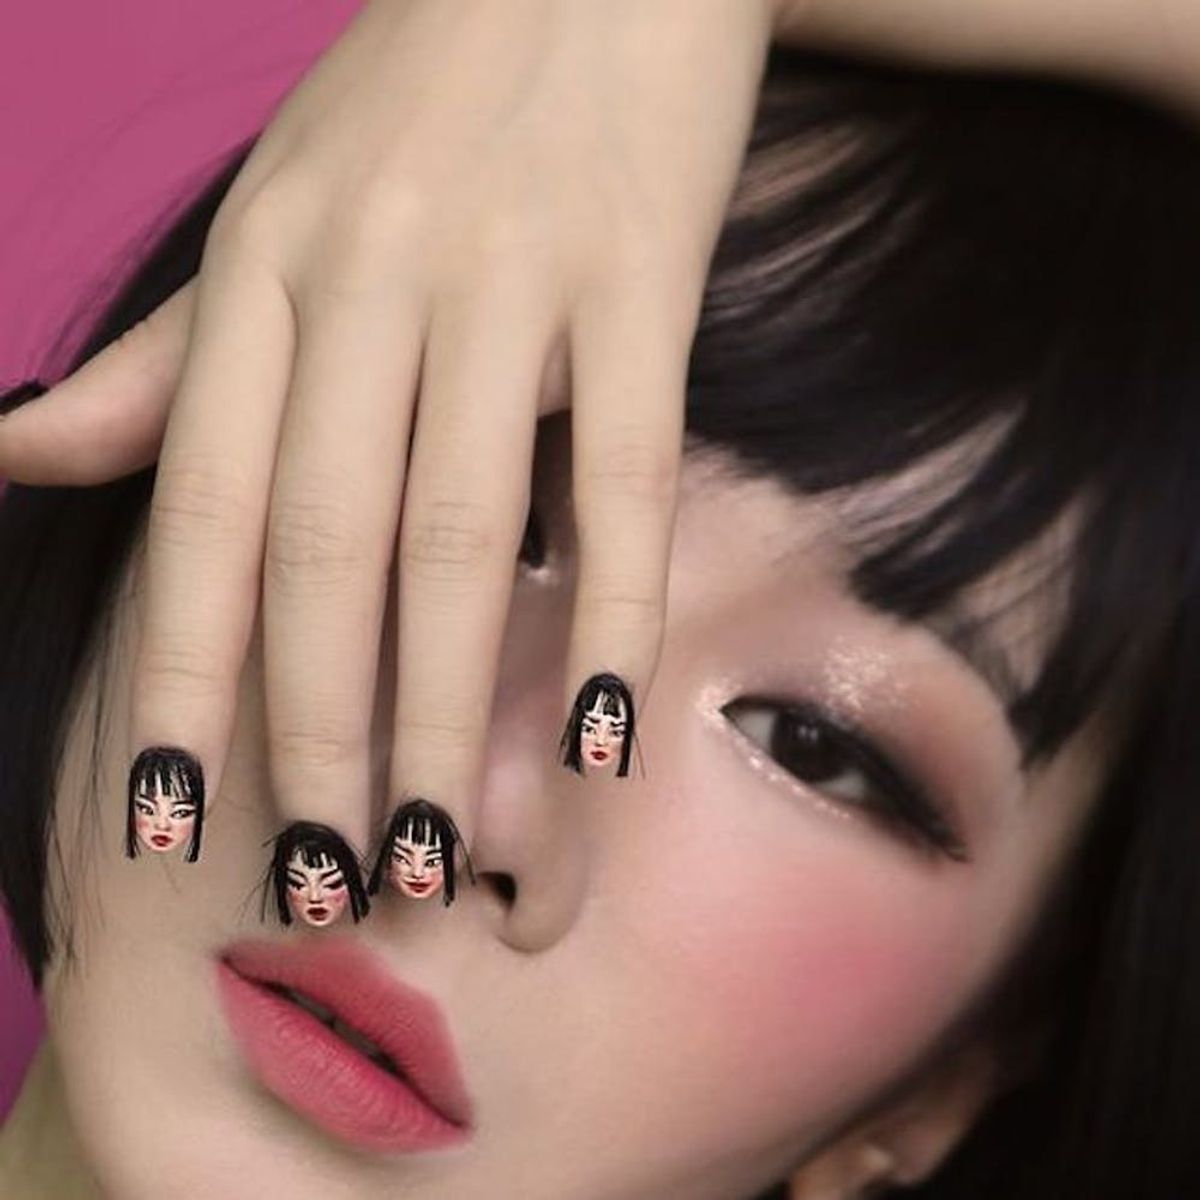 Portrait Nails Are Here to Freak You Out for Halloween